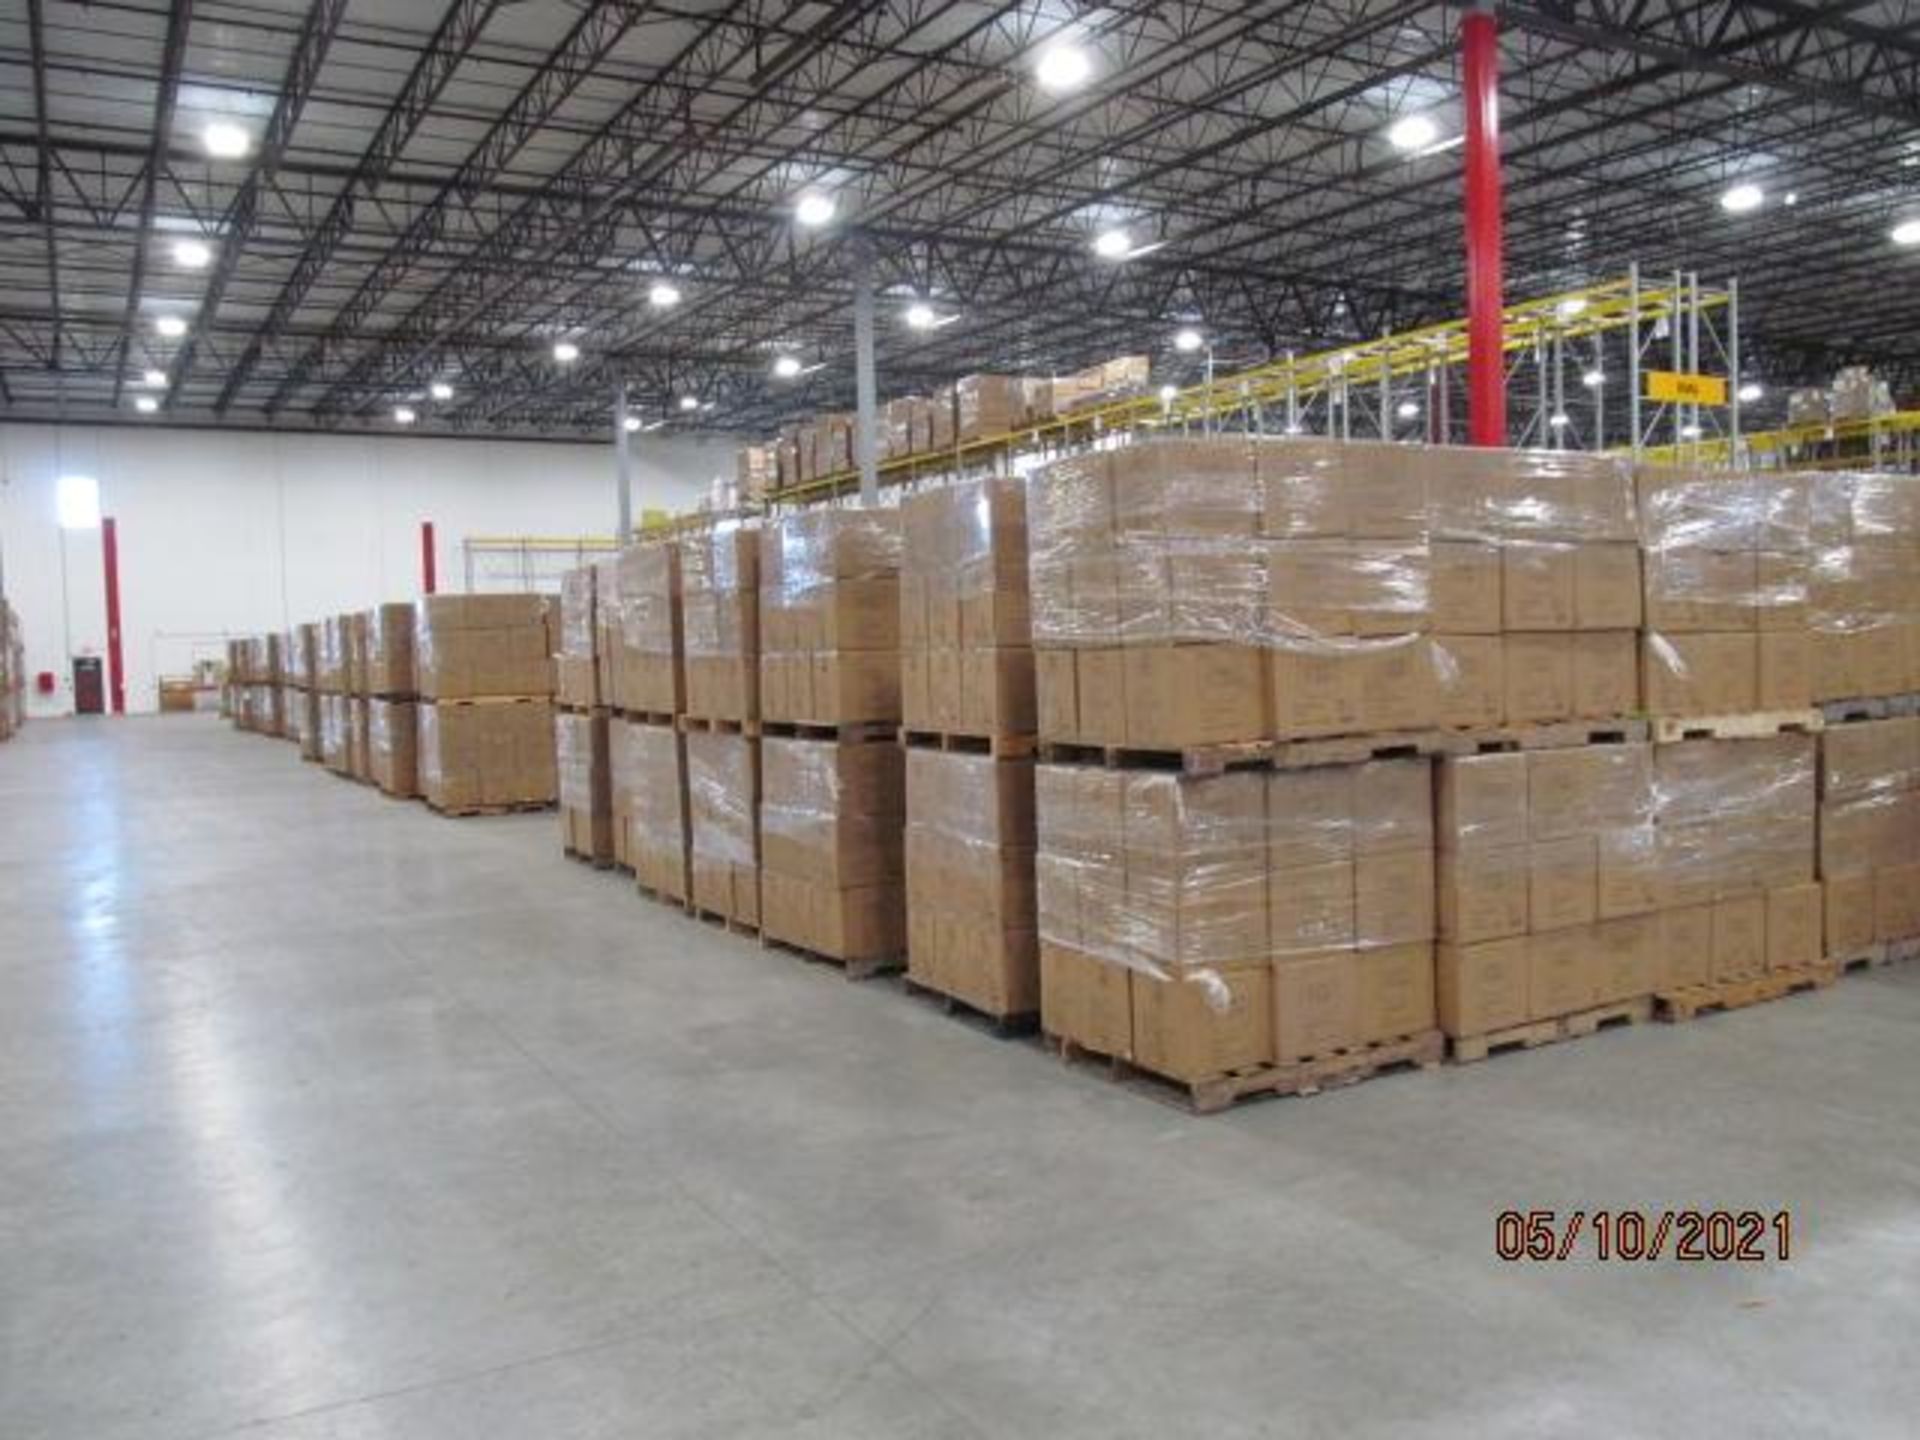 Lot of Waxman Kleen Freak Sanitizing Wipes consisting of 33,696 packages on 52 pallets. Each package - Image 10 of 11